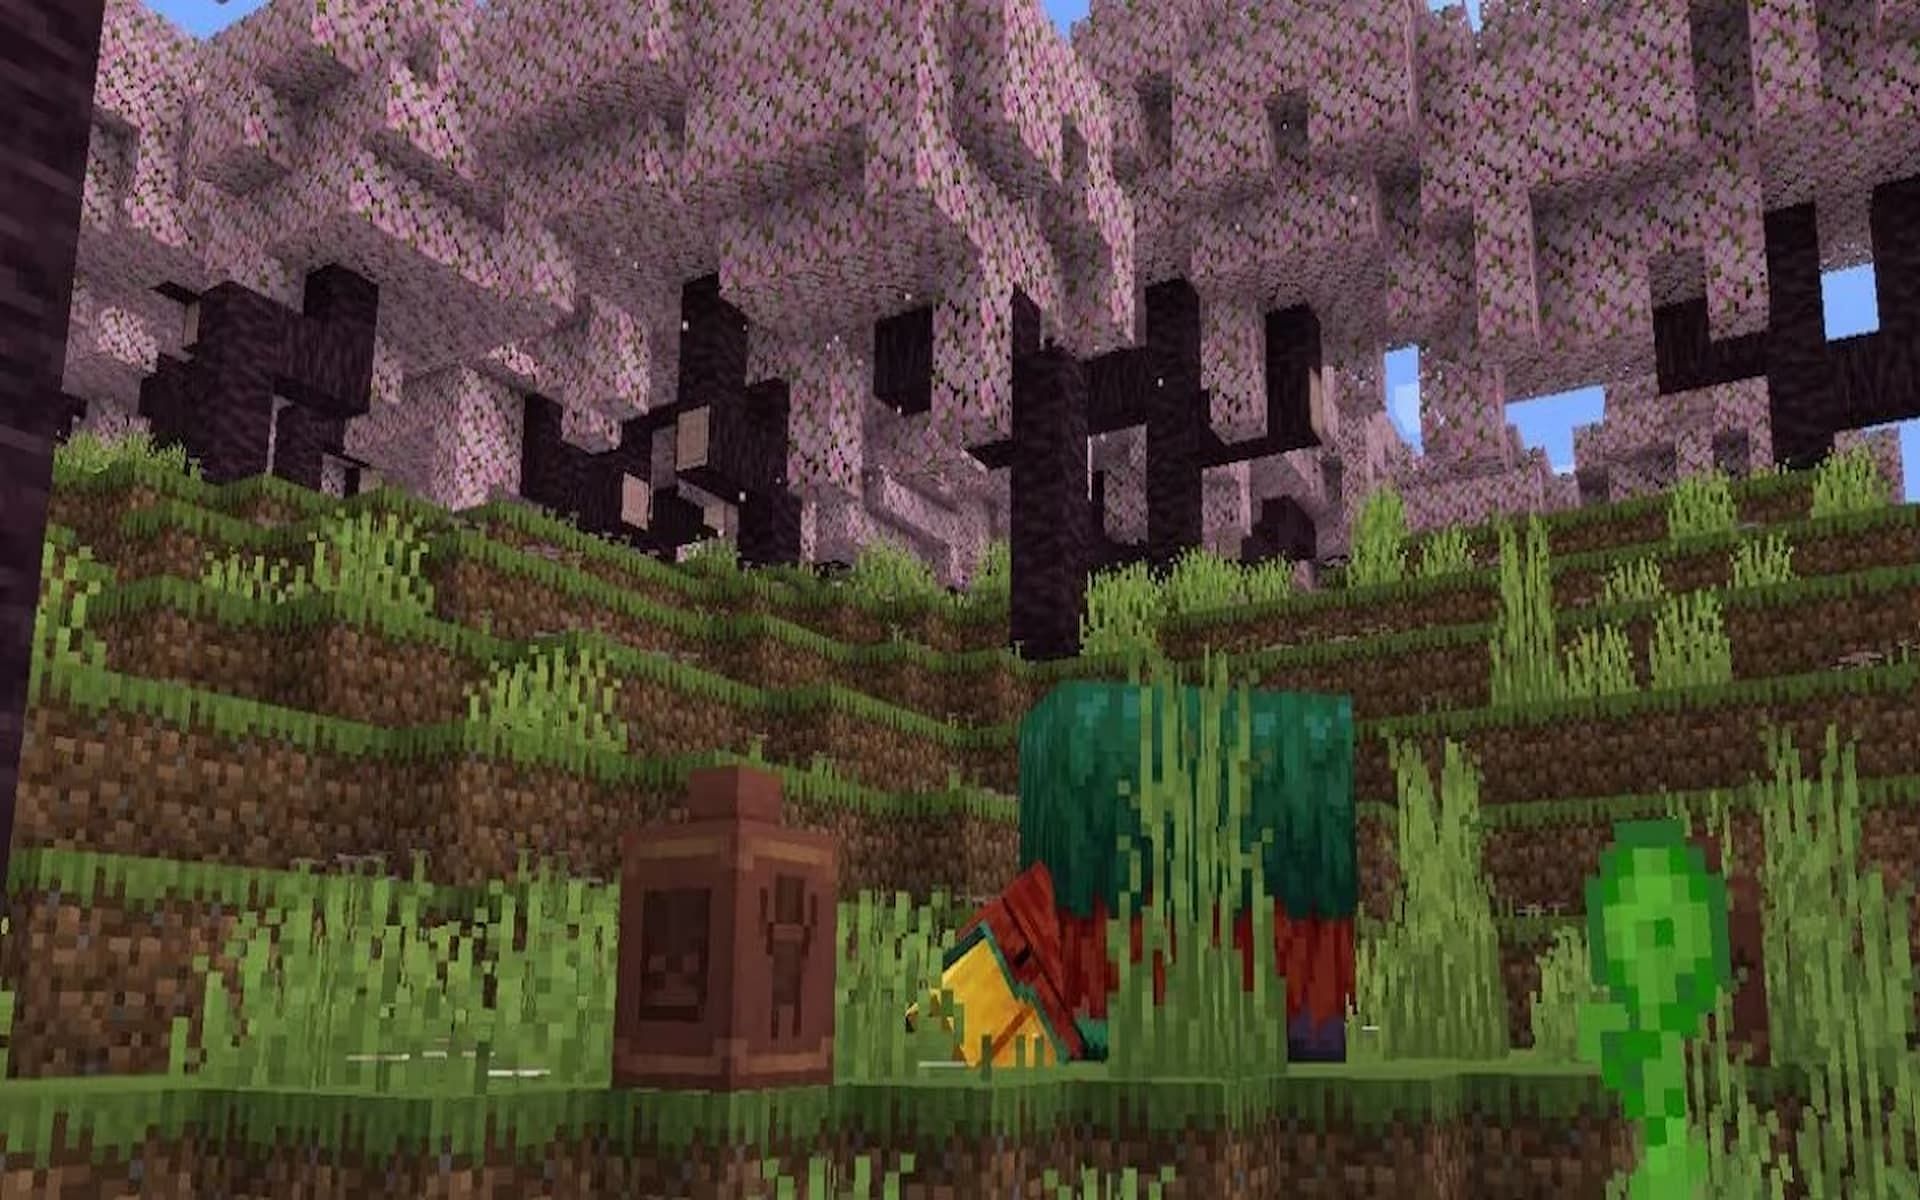 Minecraft 1.20: What We Know About Biomes, Mobs, & A Release Date